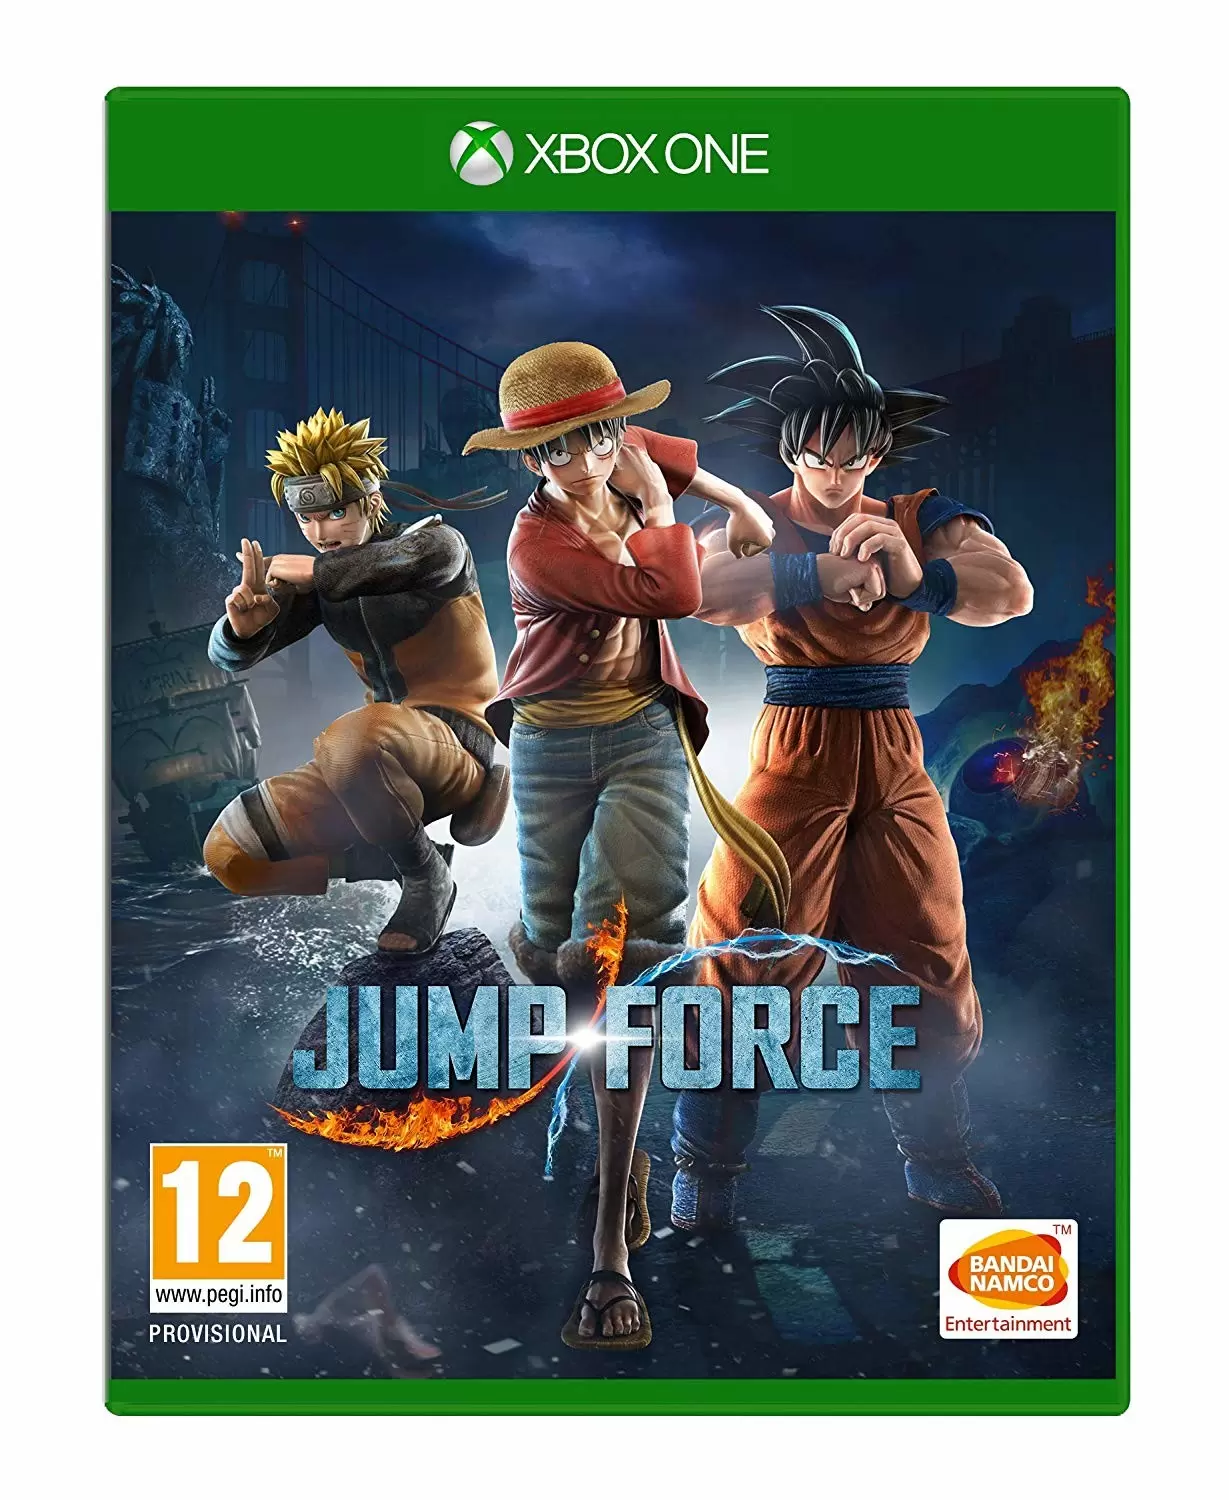 XBOX One Games - Jump Force